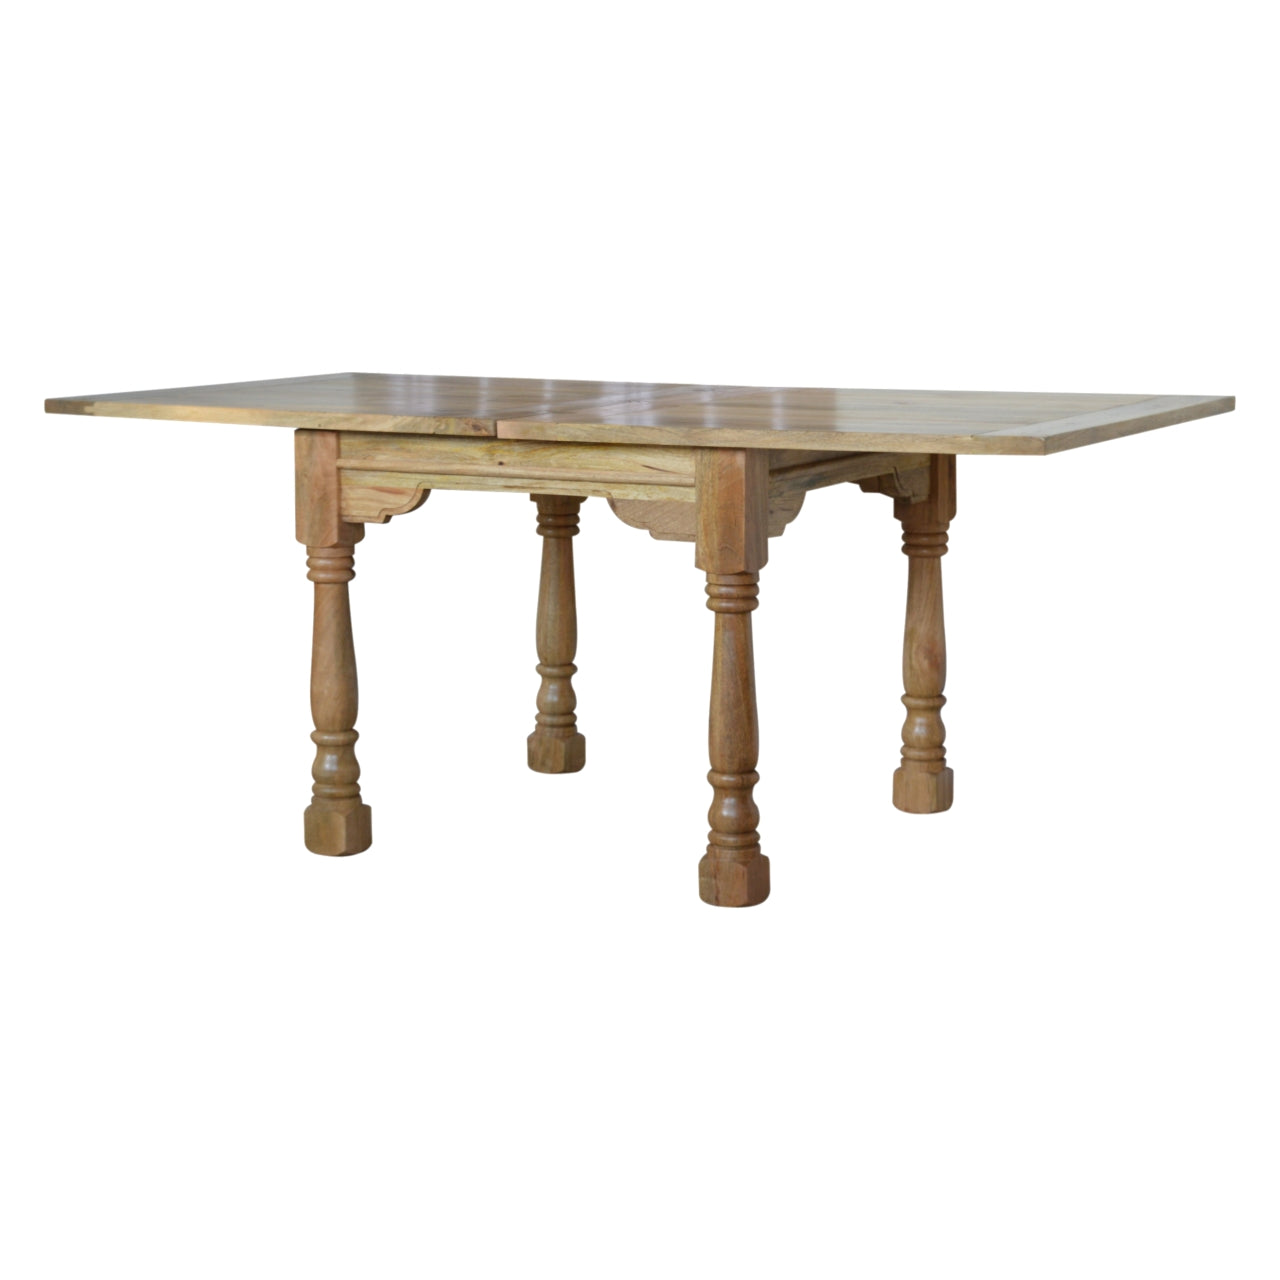 Turned Leg Butterfly Dining Table